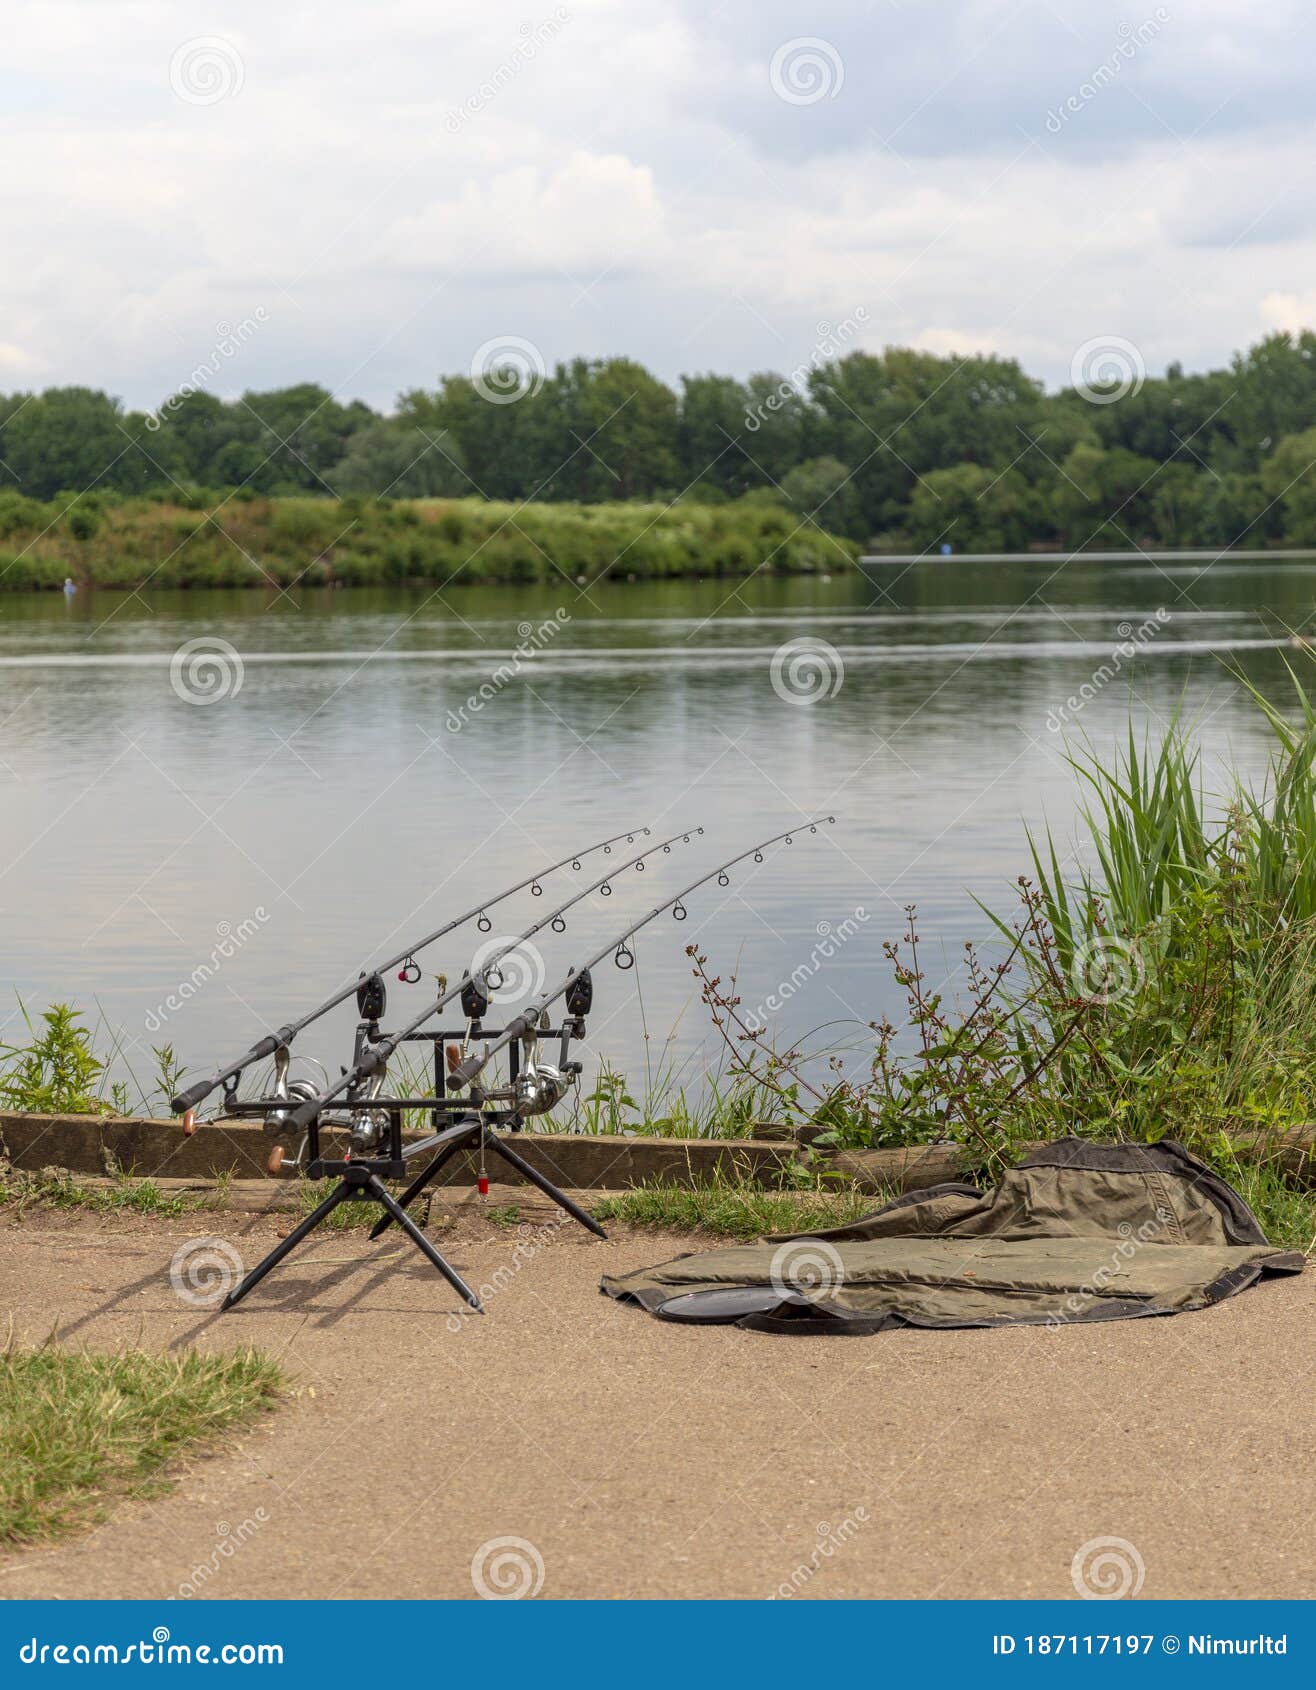 https://thumbs.dreamstime.com/z/three-fishing-rods-reels-side-peaceful-lake-stand-unhooking-mat-platform-picturesque-waiting-187117197.jpg